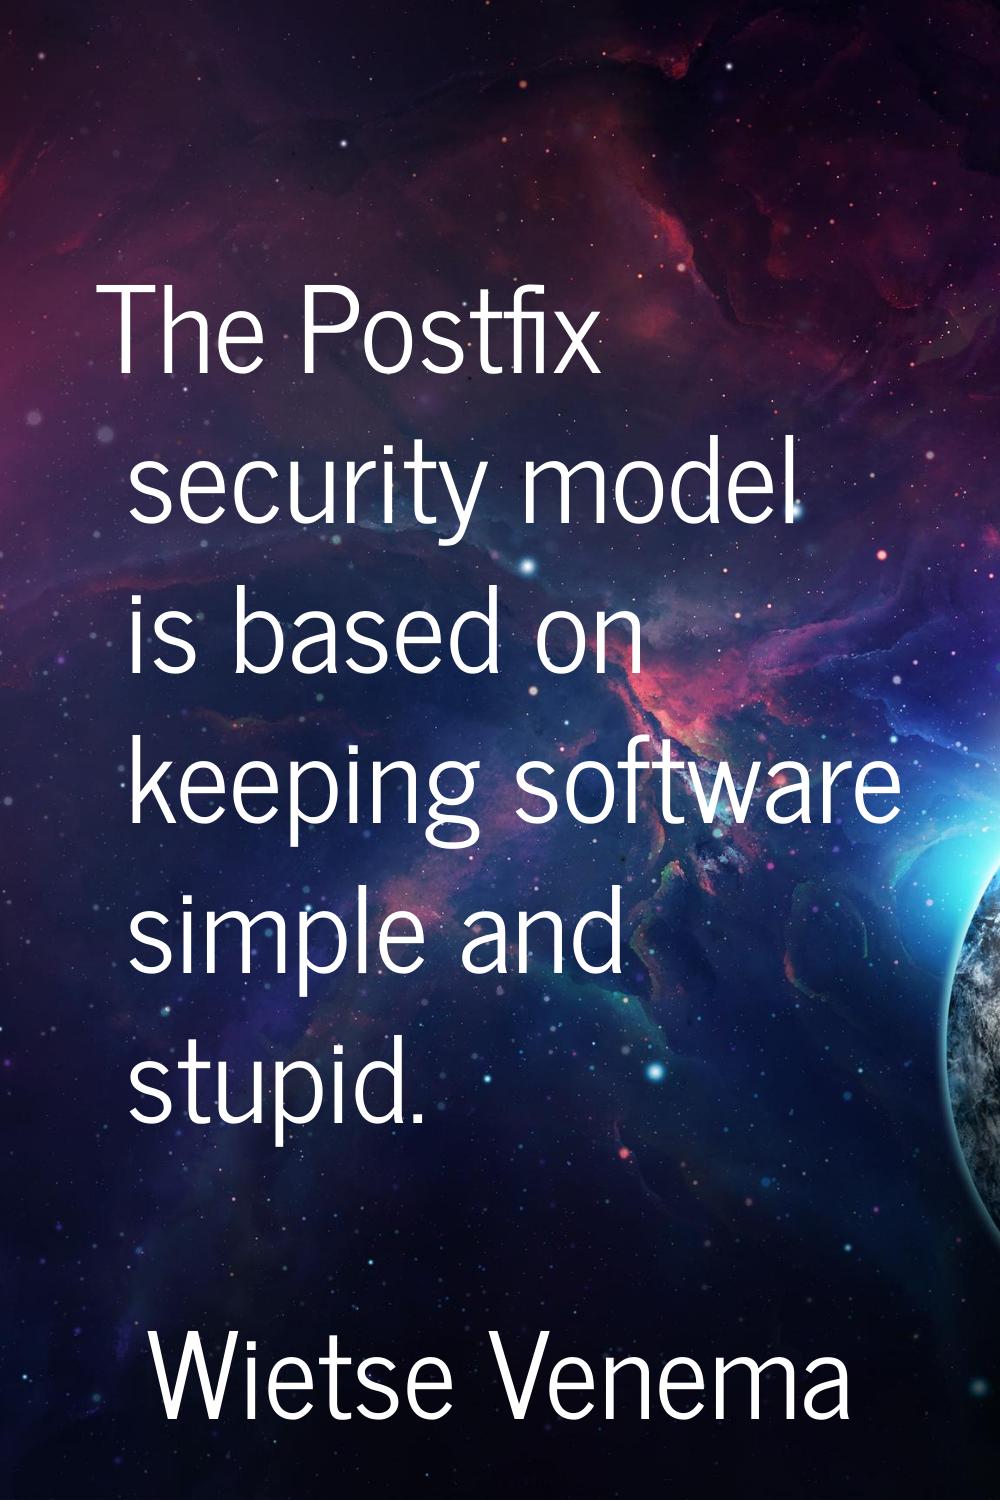 The Postfix security model is based on keeping software simple and stupid.